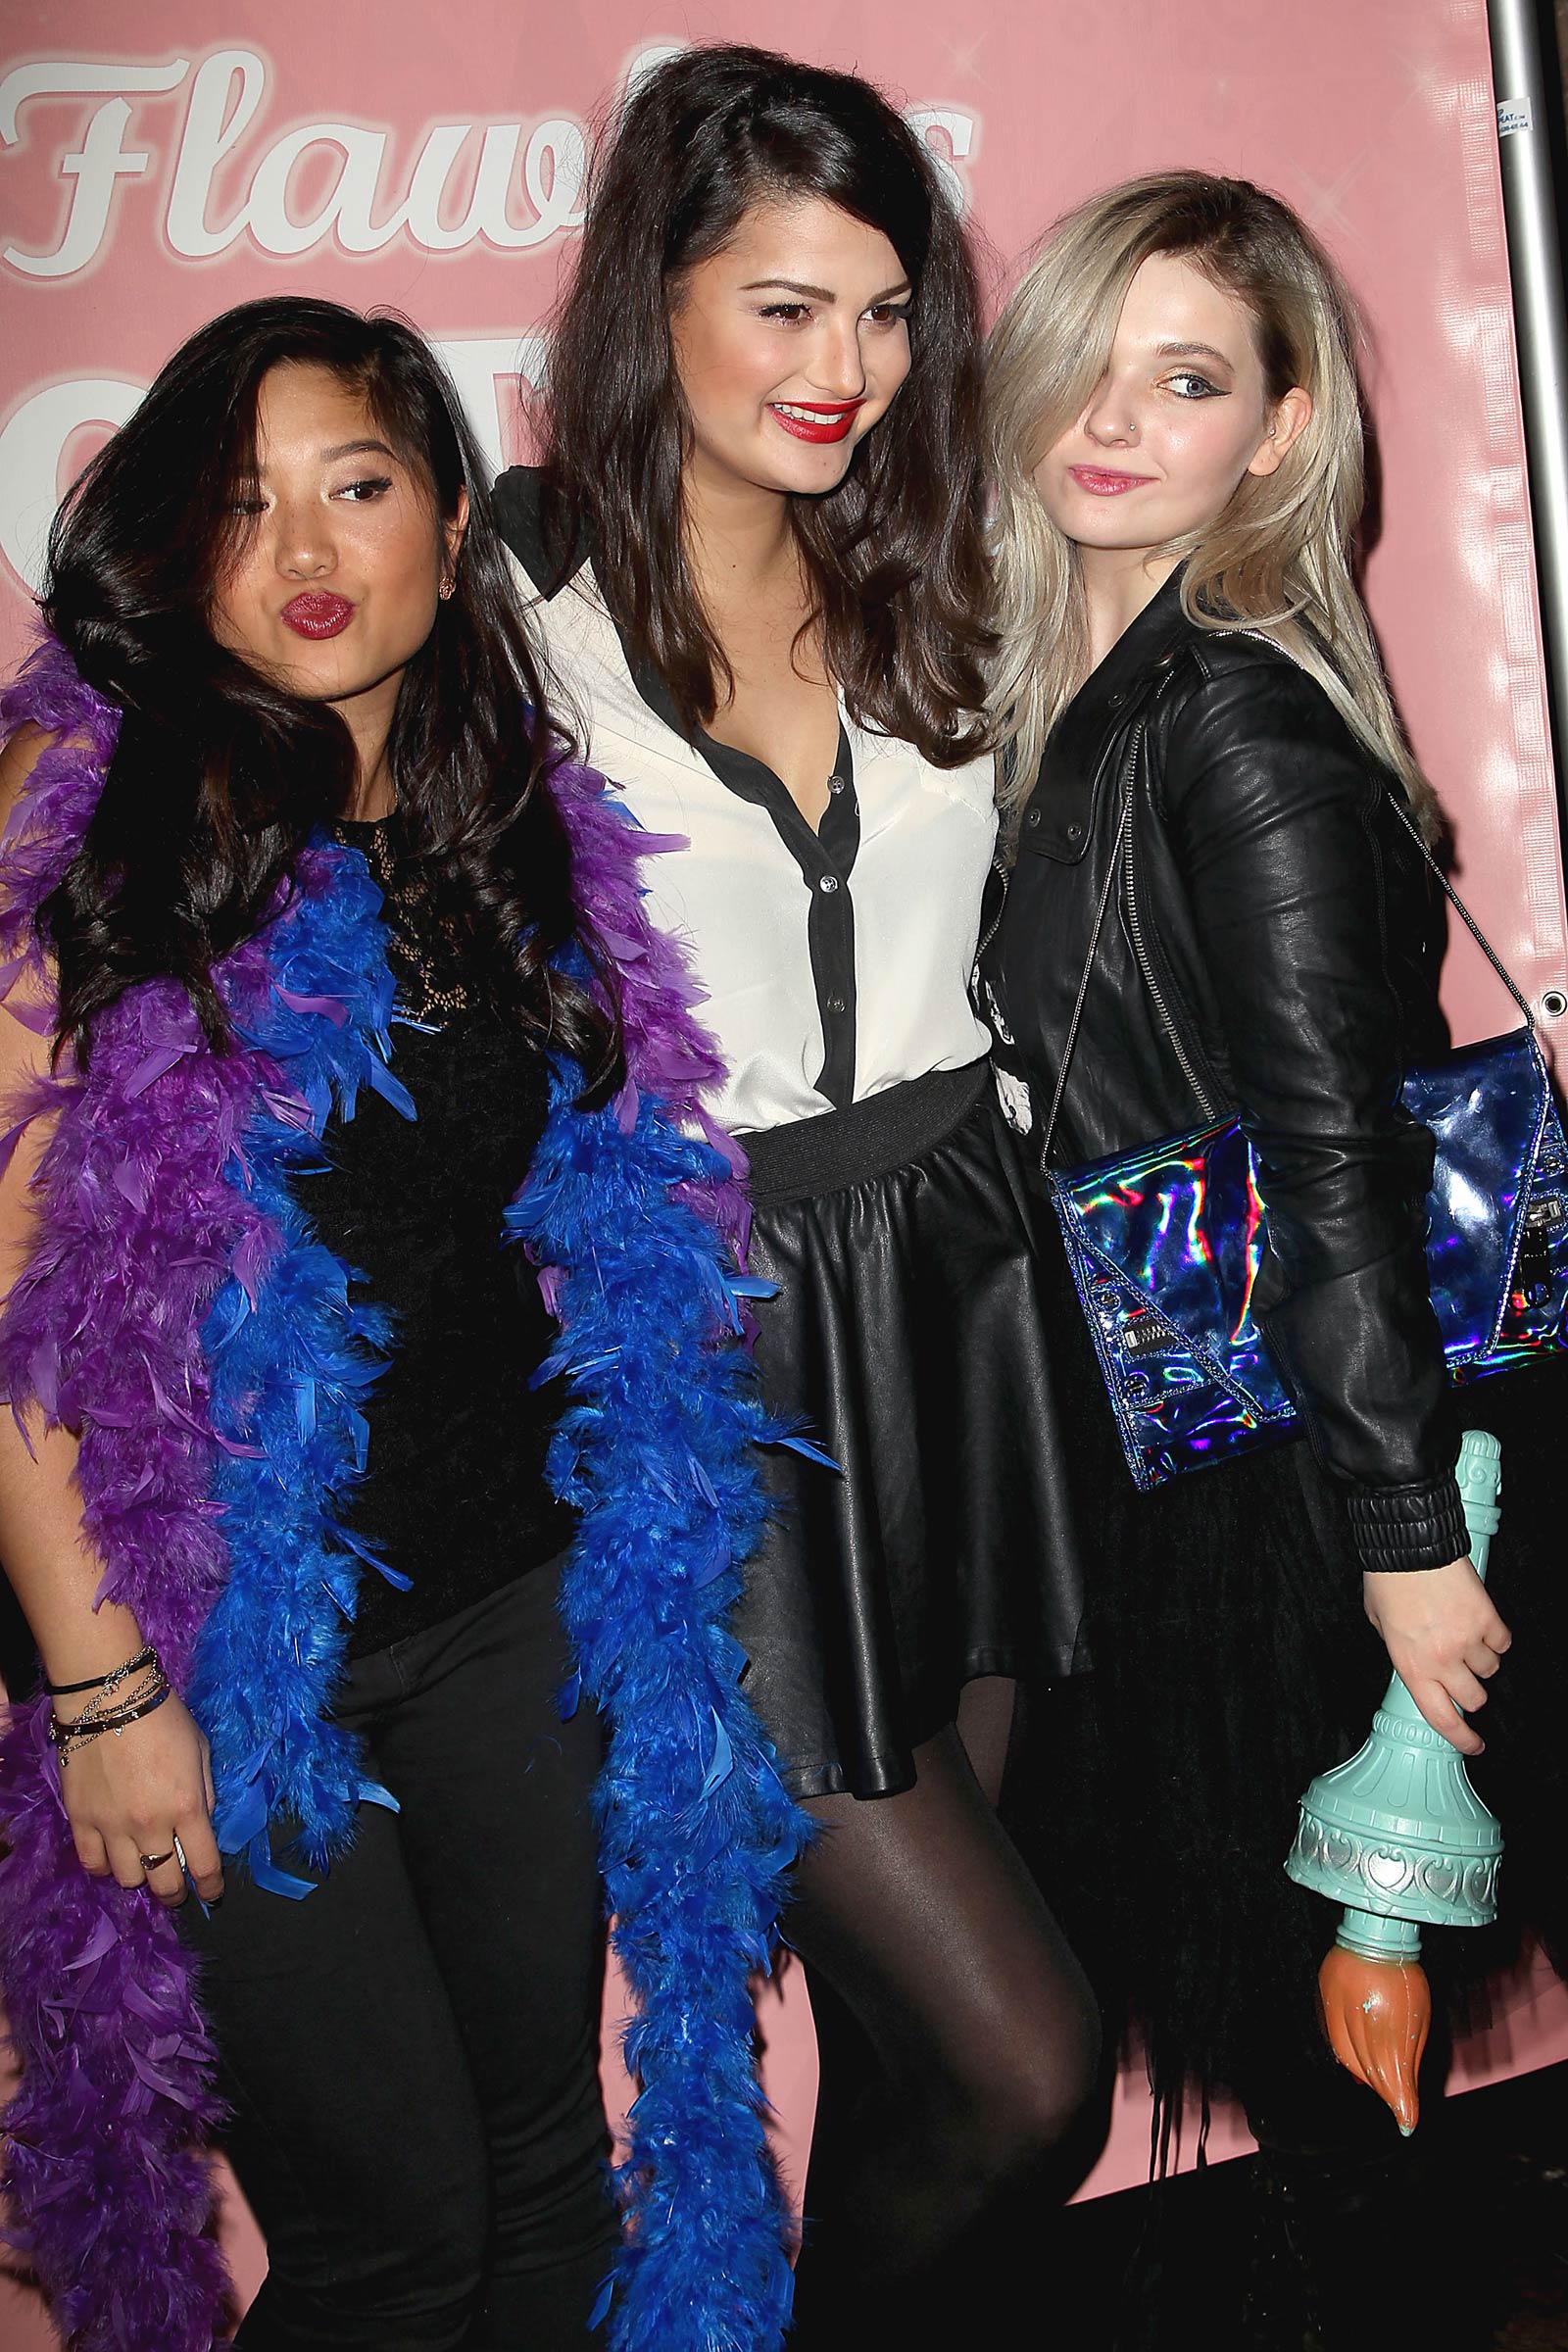 Abigail Breslin attends Benefit Cosmetics And BaubleBar Collaboration Party